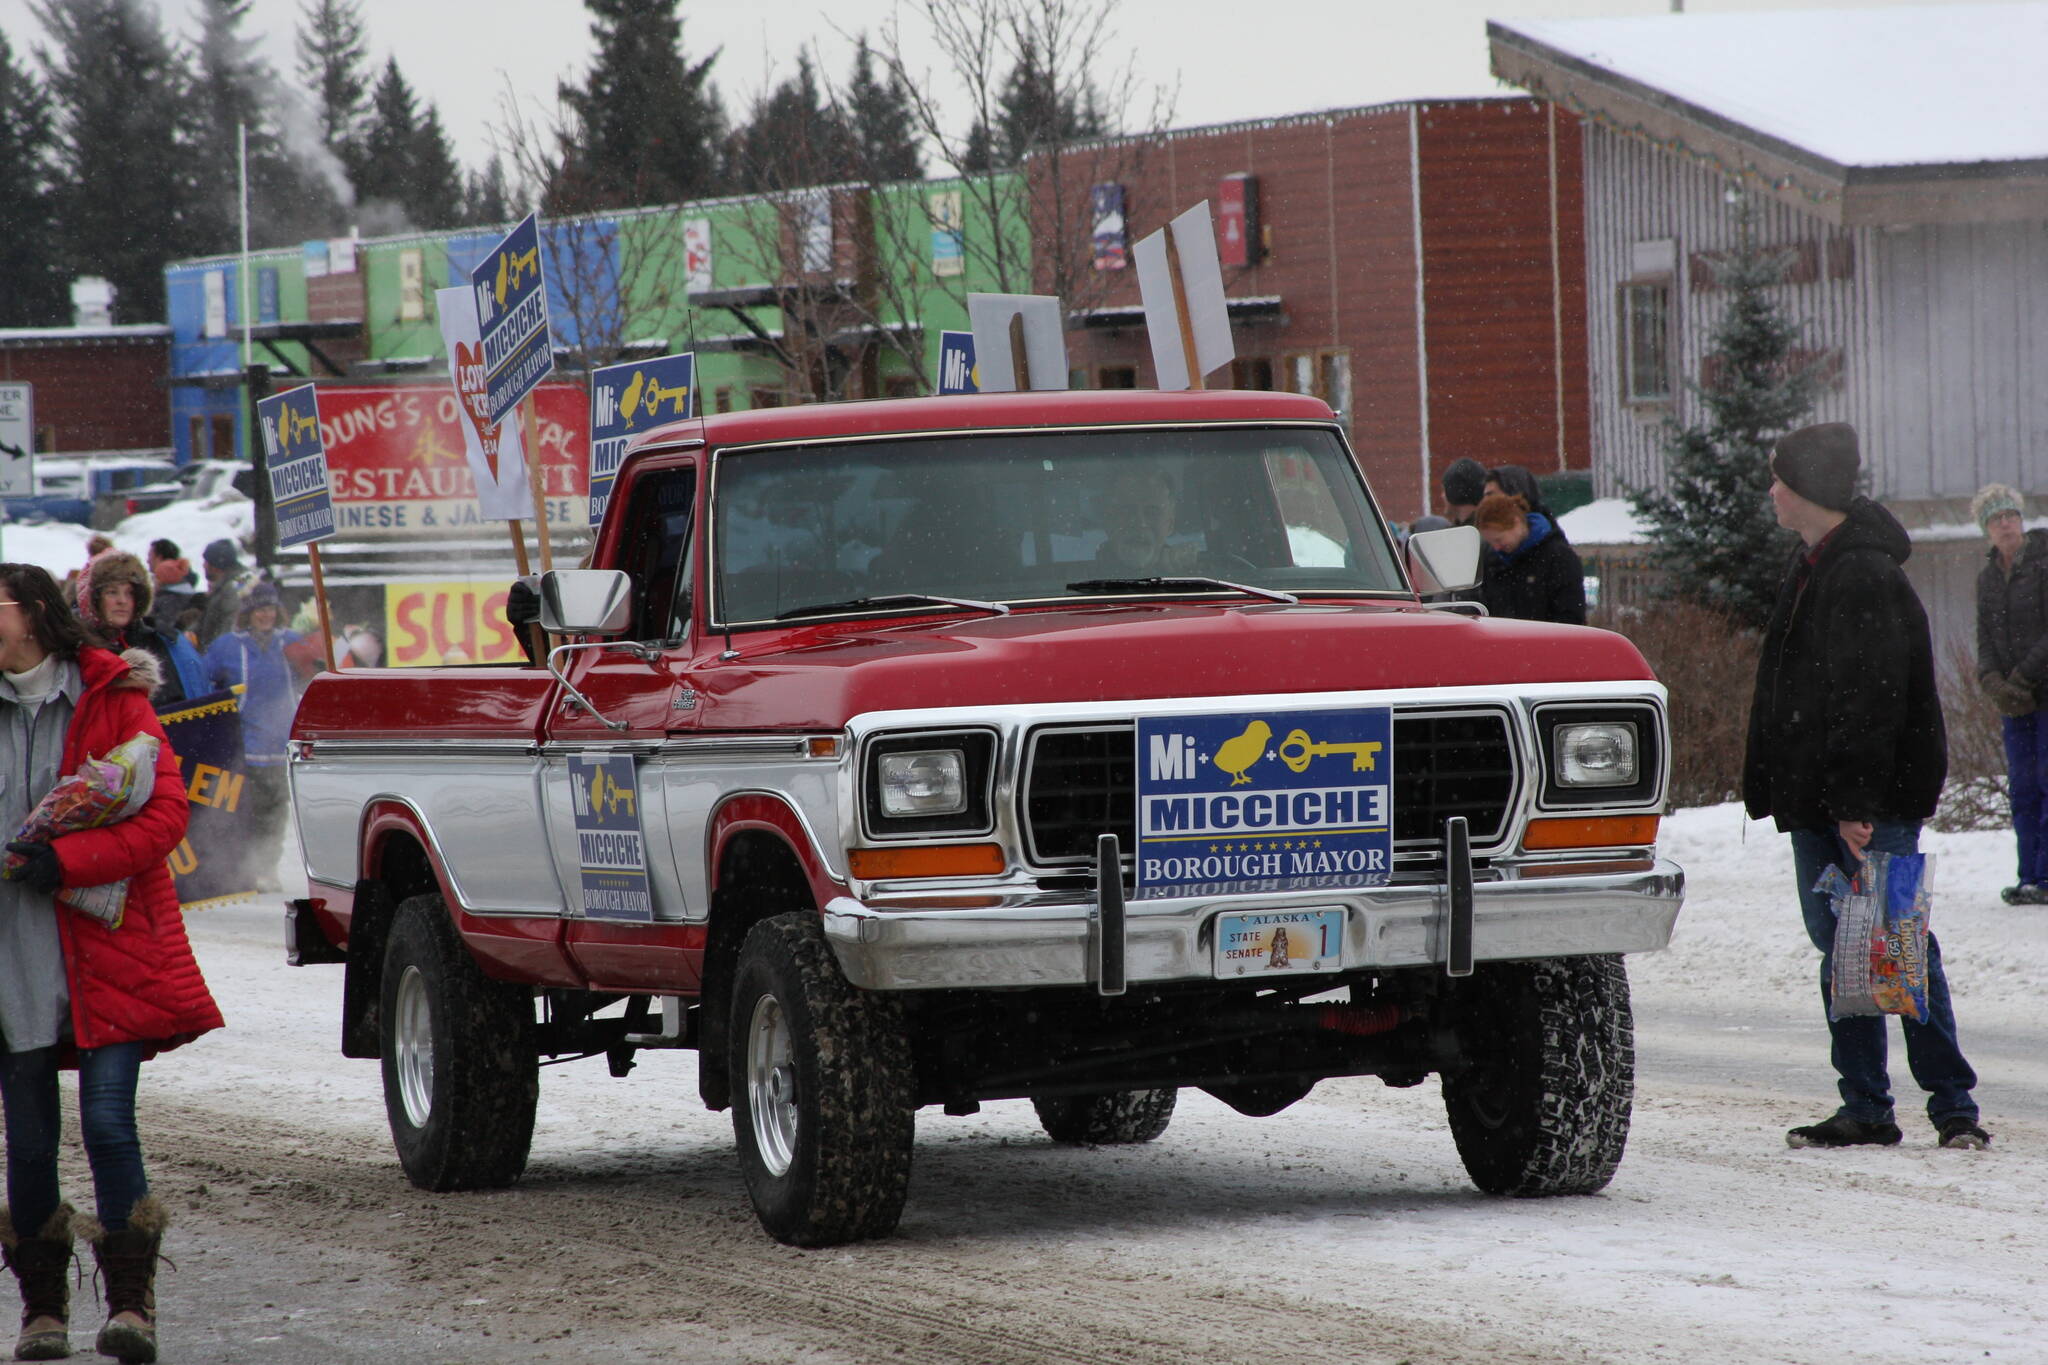 Borough mayoral candidate Peter Micciche drives down Pioneer Avenue in the 69th annual Winter Carnival Parade on Saturday, Feb. 11, 2023 in Homer, Alaska. Photo by Delcenia Cosman